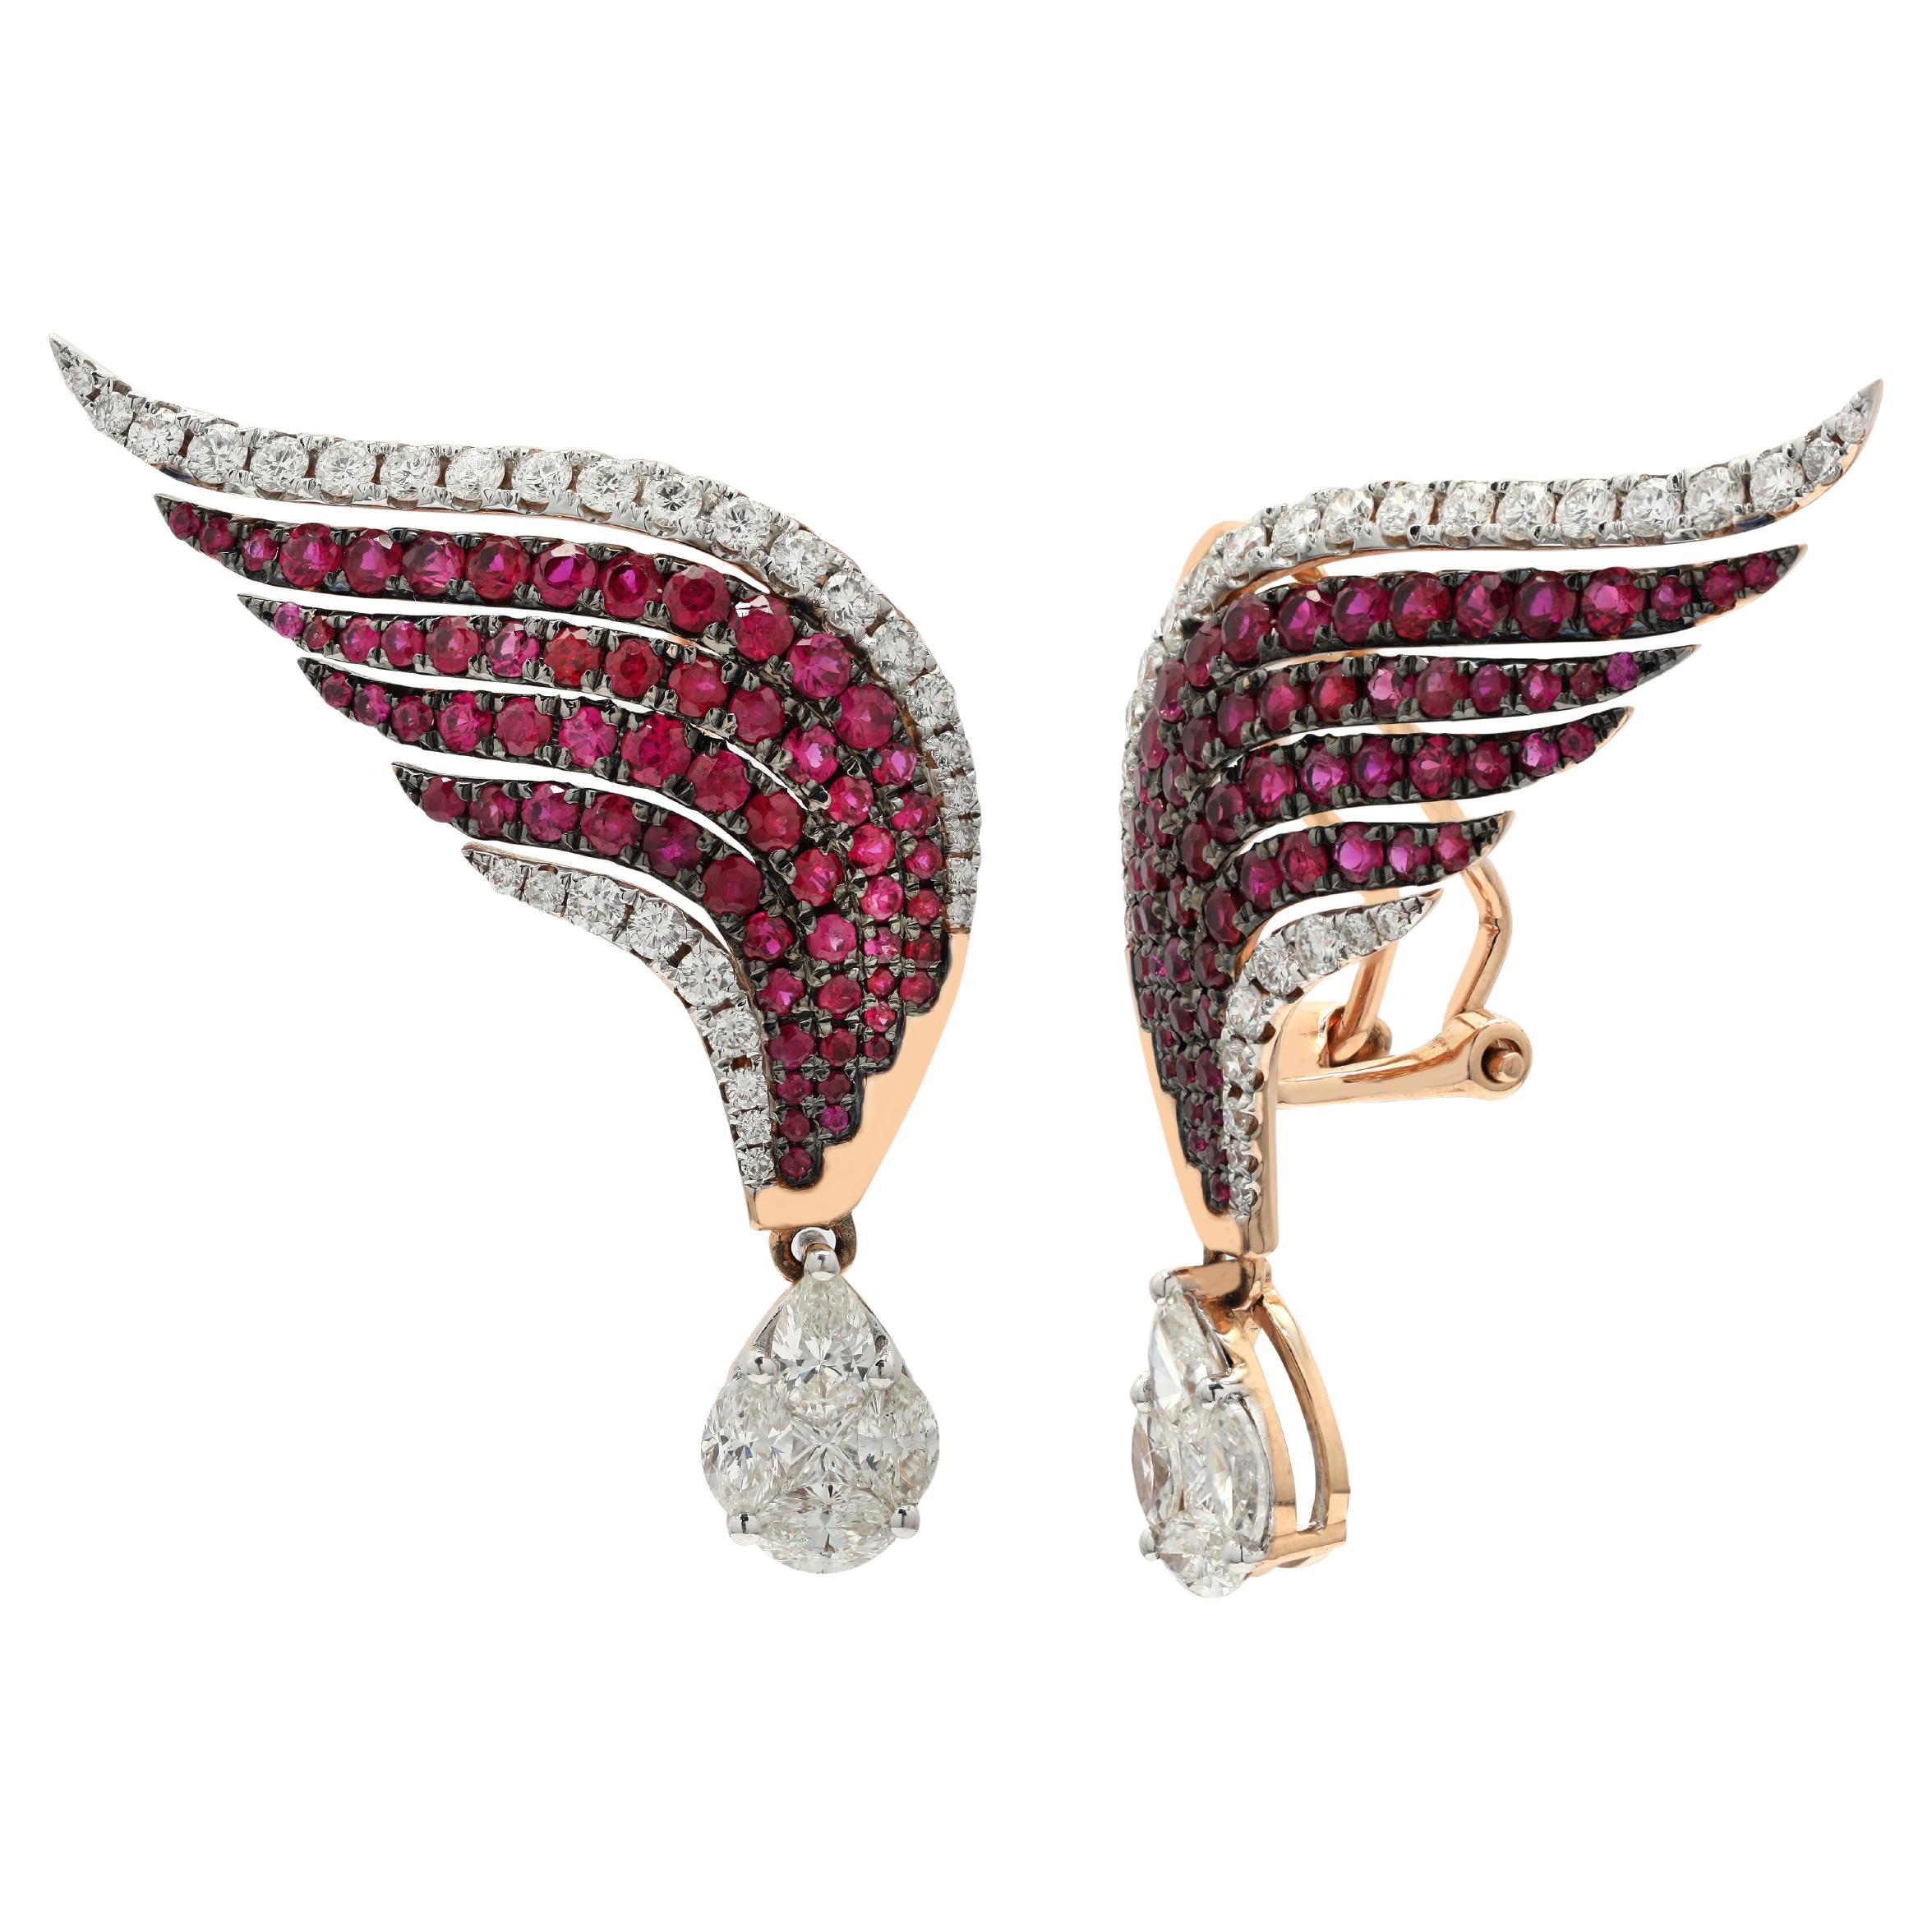 SilverTree925 Stylish Natural Ruby Earrings in gold Micron Plated (ST 519)  : SilverTree925: Amazon.in: Fashion